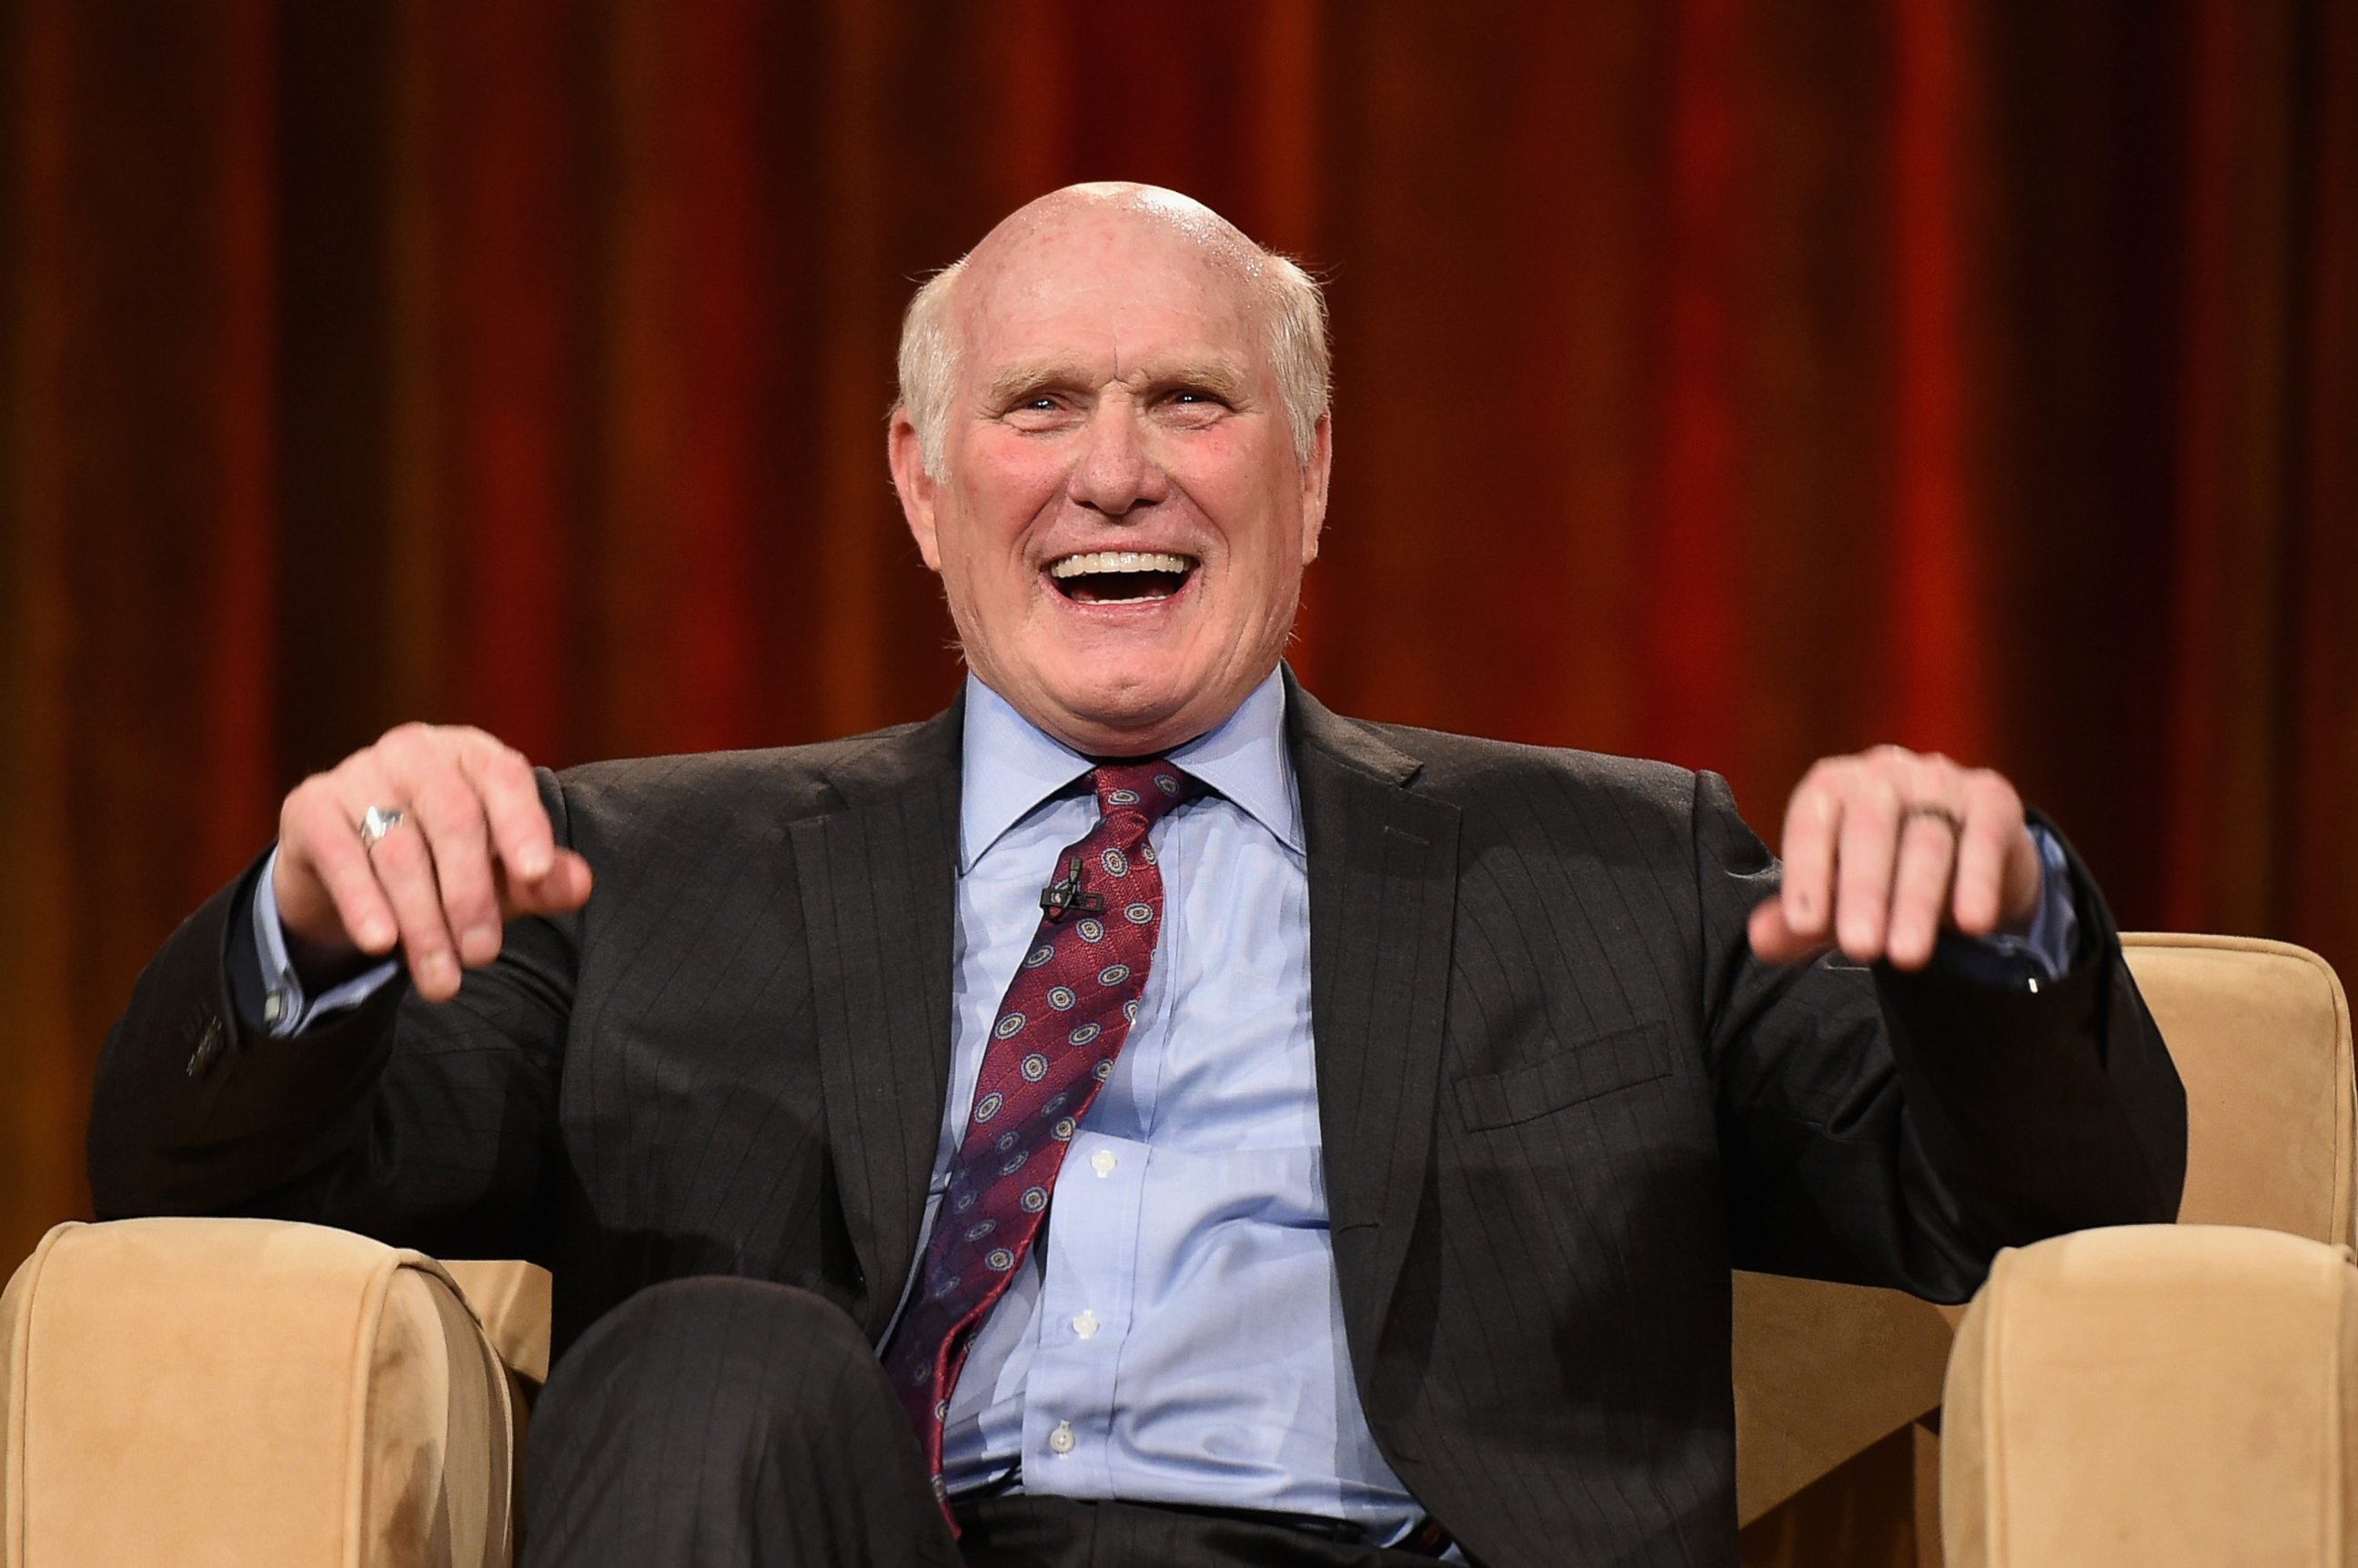 PHOTO: Honoree Terry Bradshaw onstage at the Friars Club Roast of Terry Bradshaw on Jan. 29, 2015 in Phoenix.